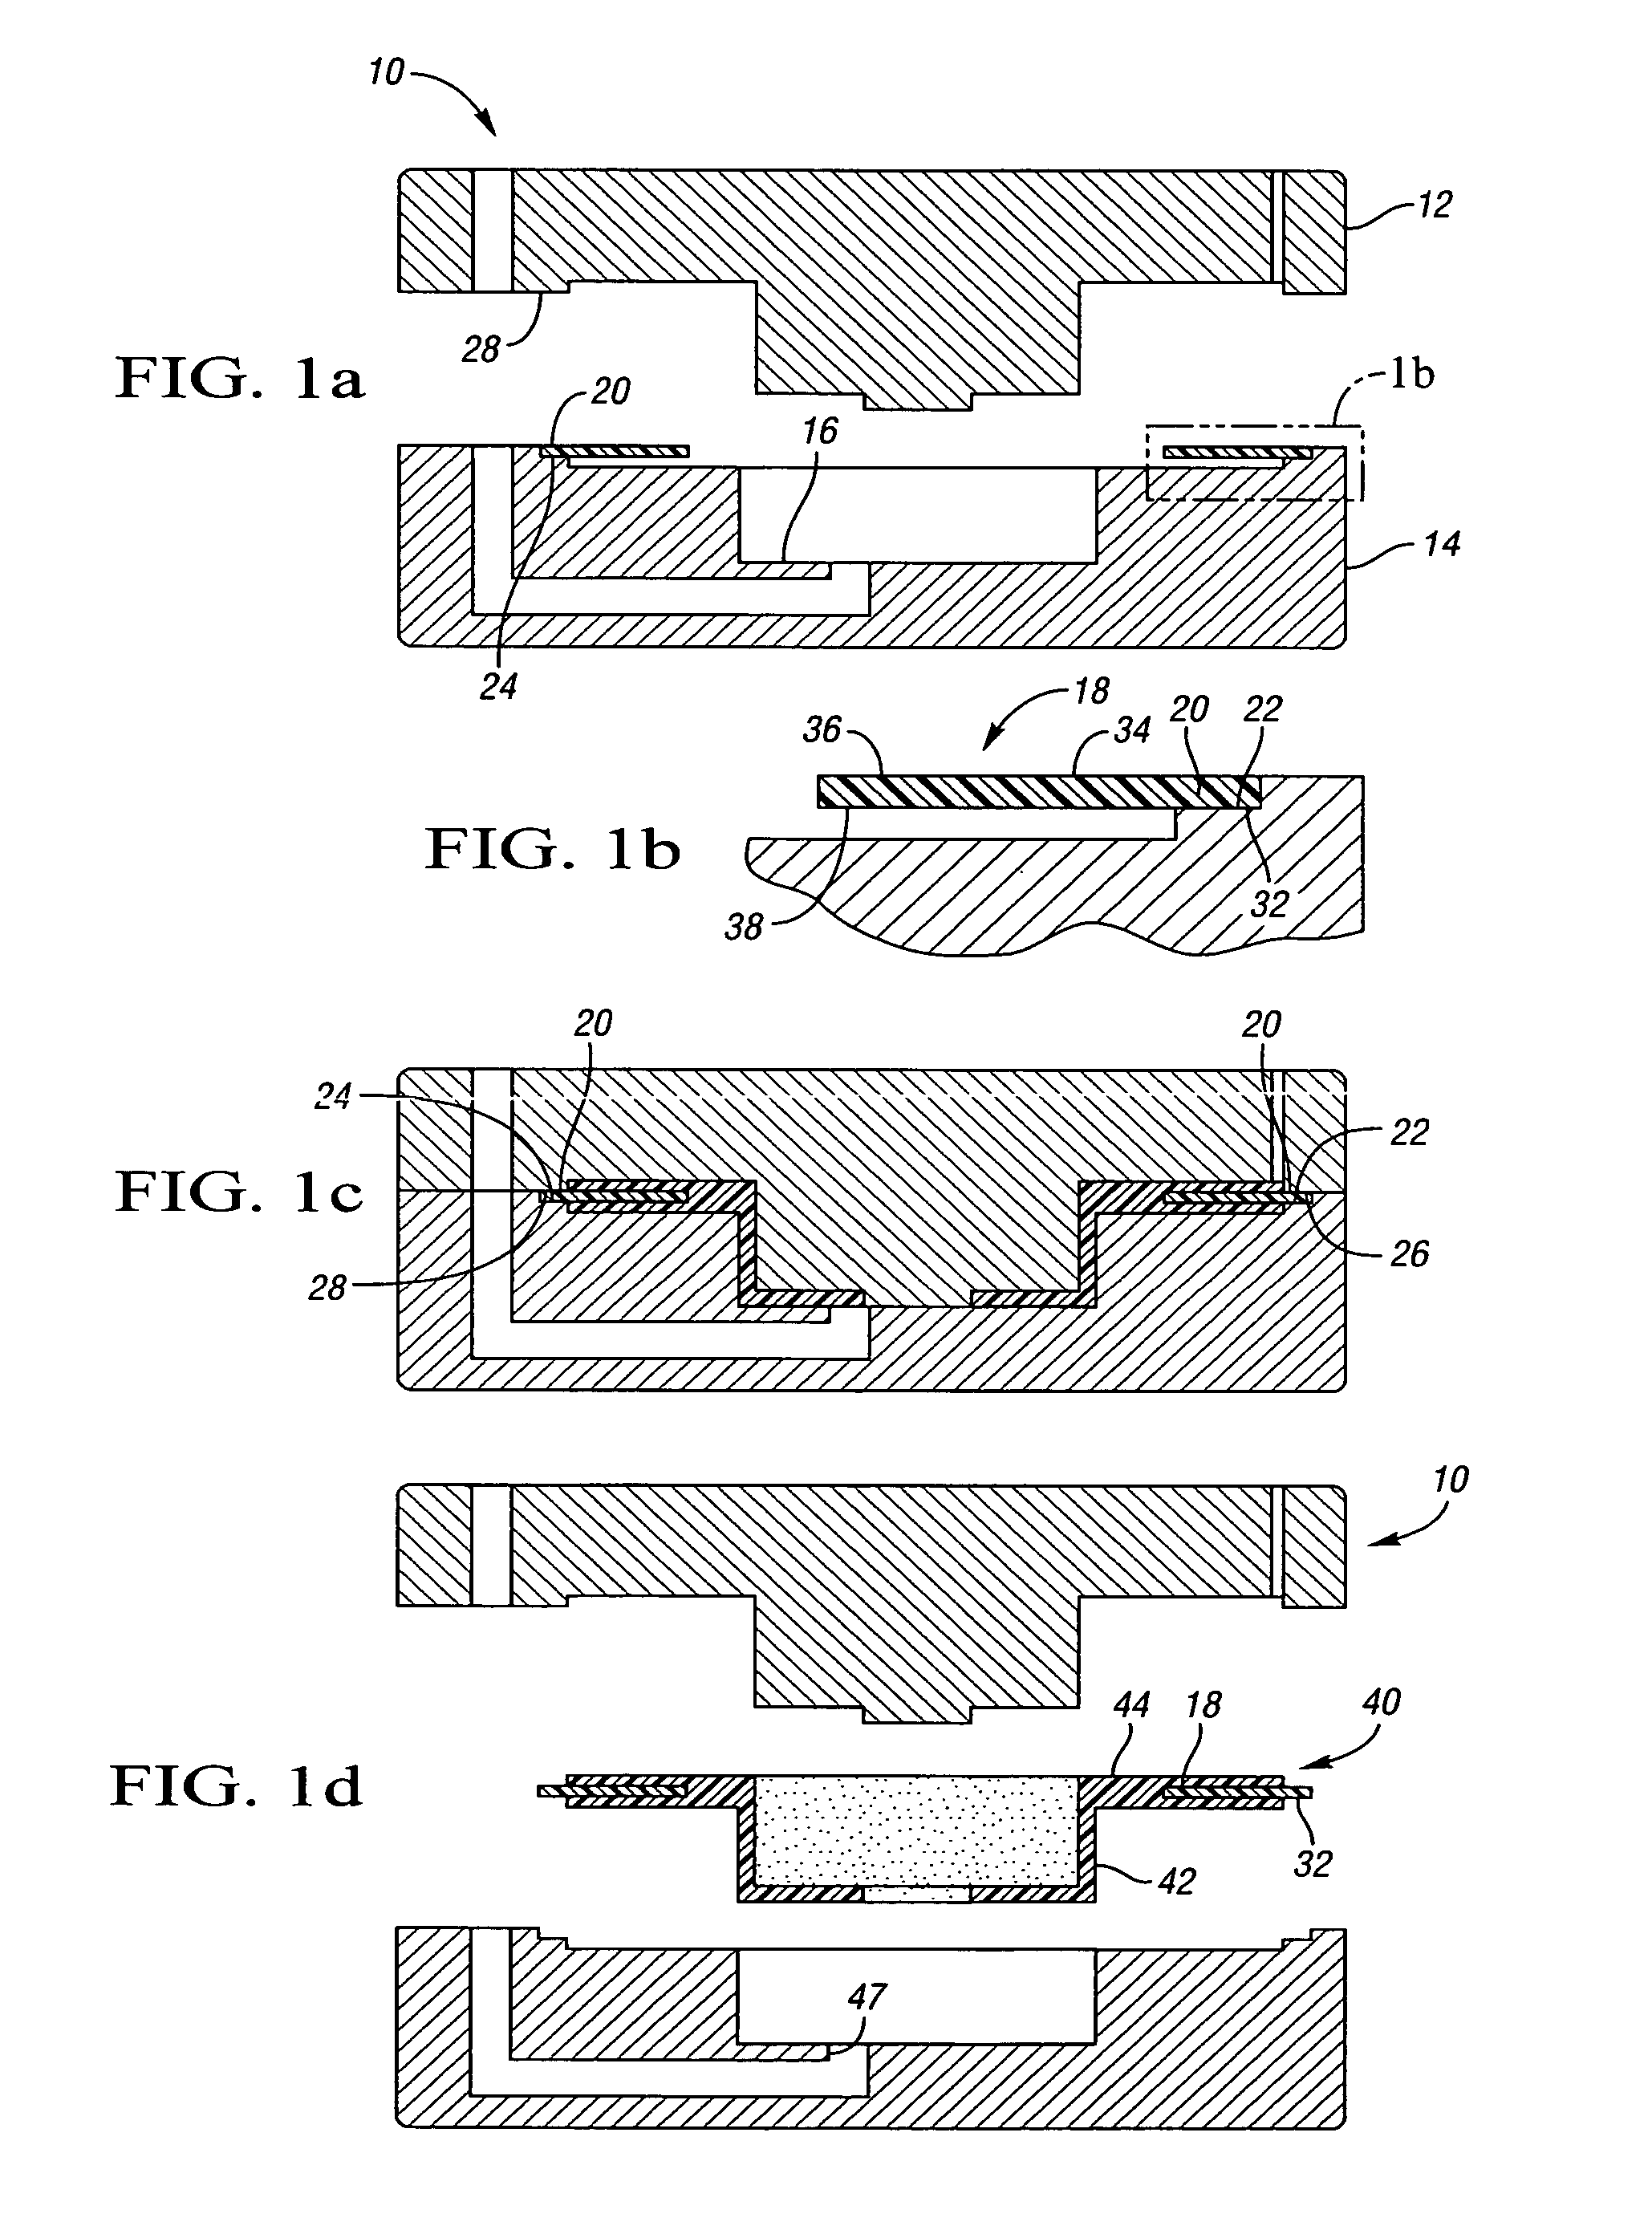 Method of manufacturing a friction damped disc brake rotor